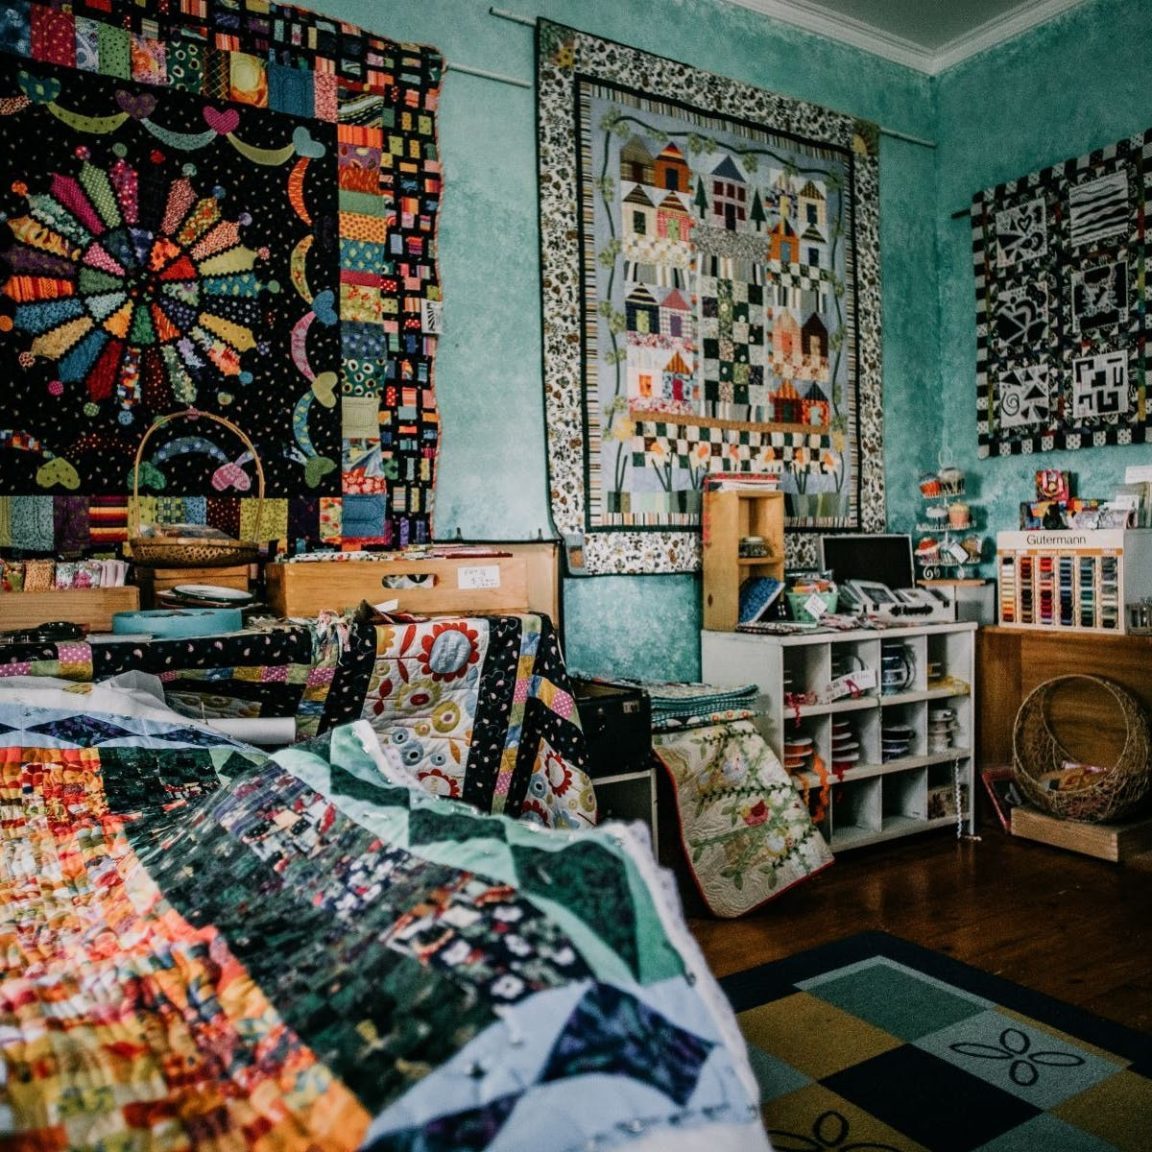 Image of room full of quilts